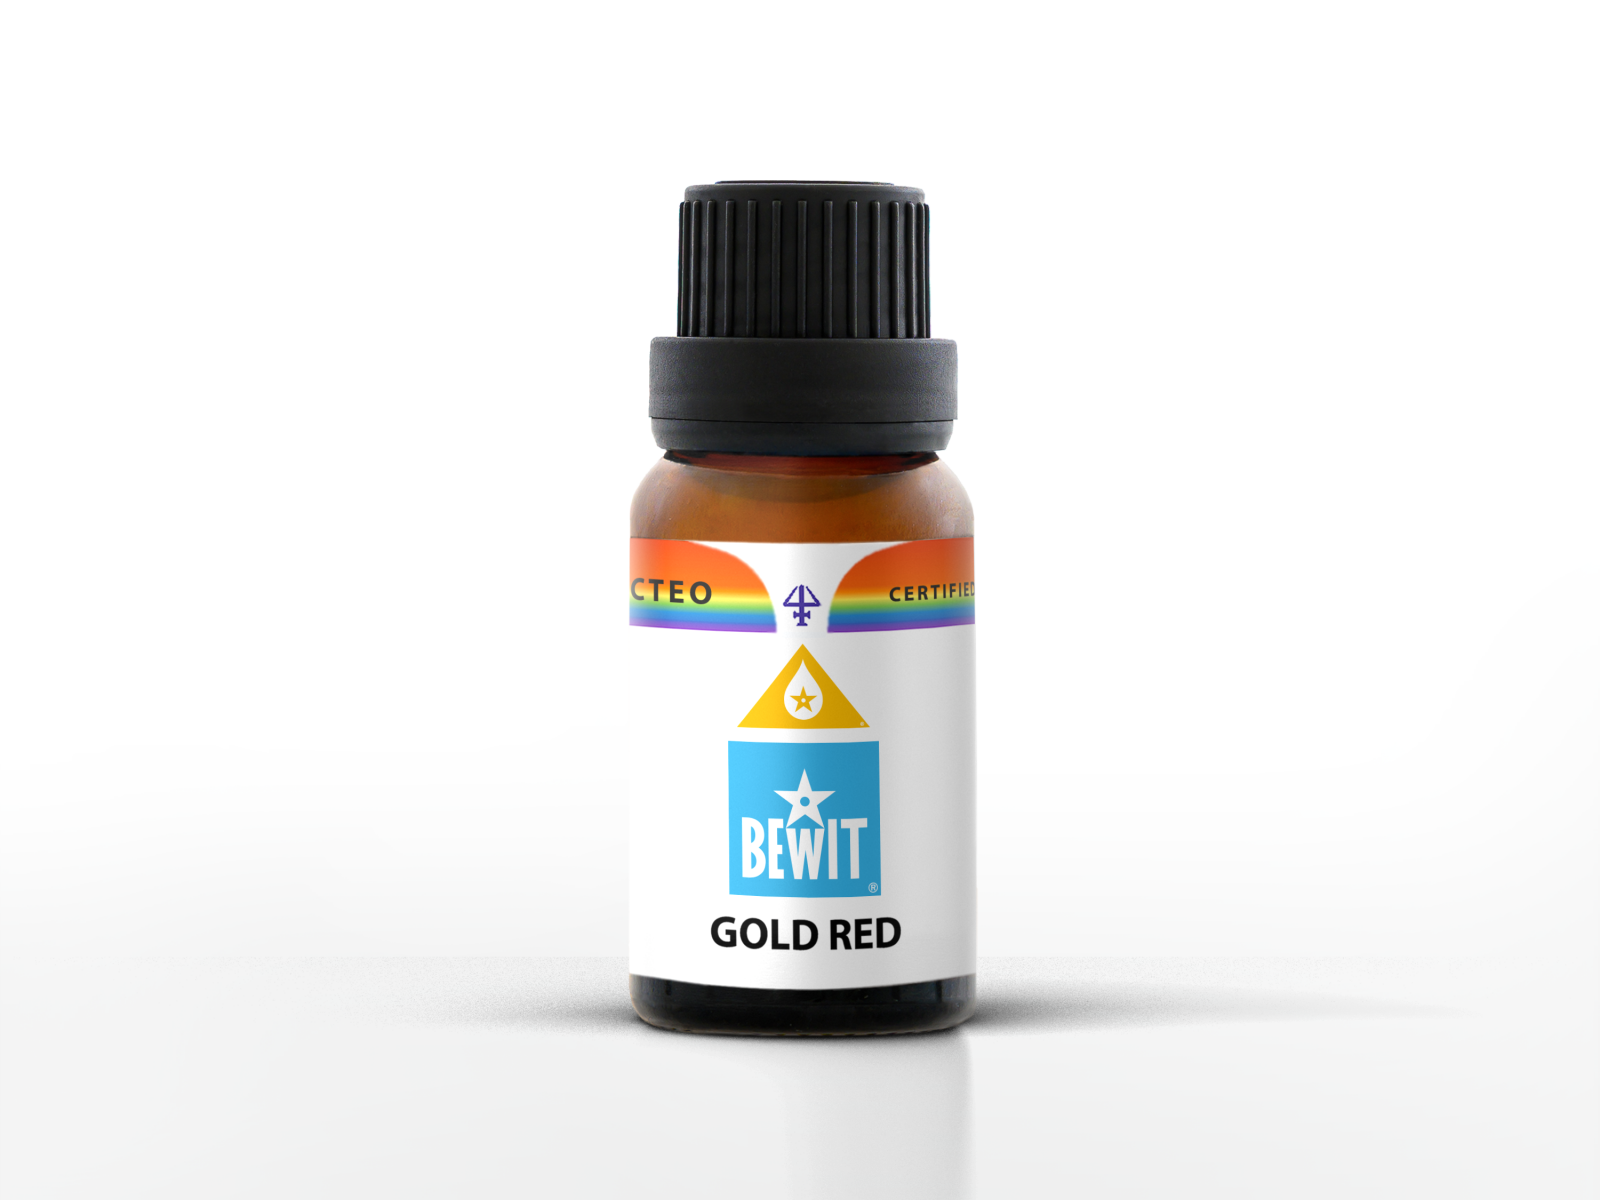 BEWIT Gold Red - 100% natural essential oil blend in CTEO® quality